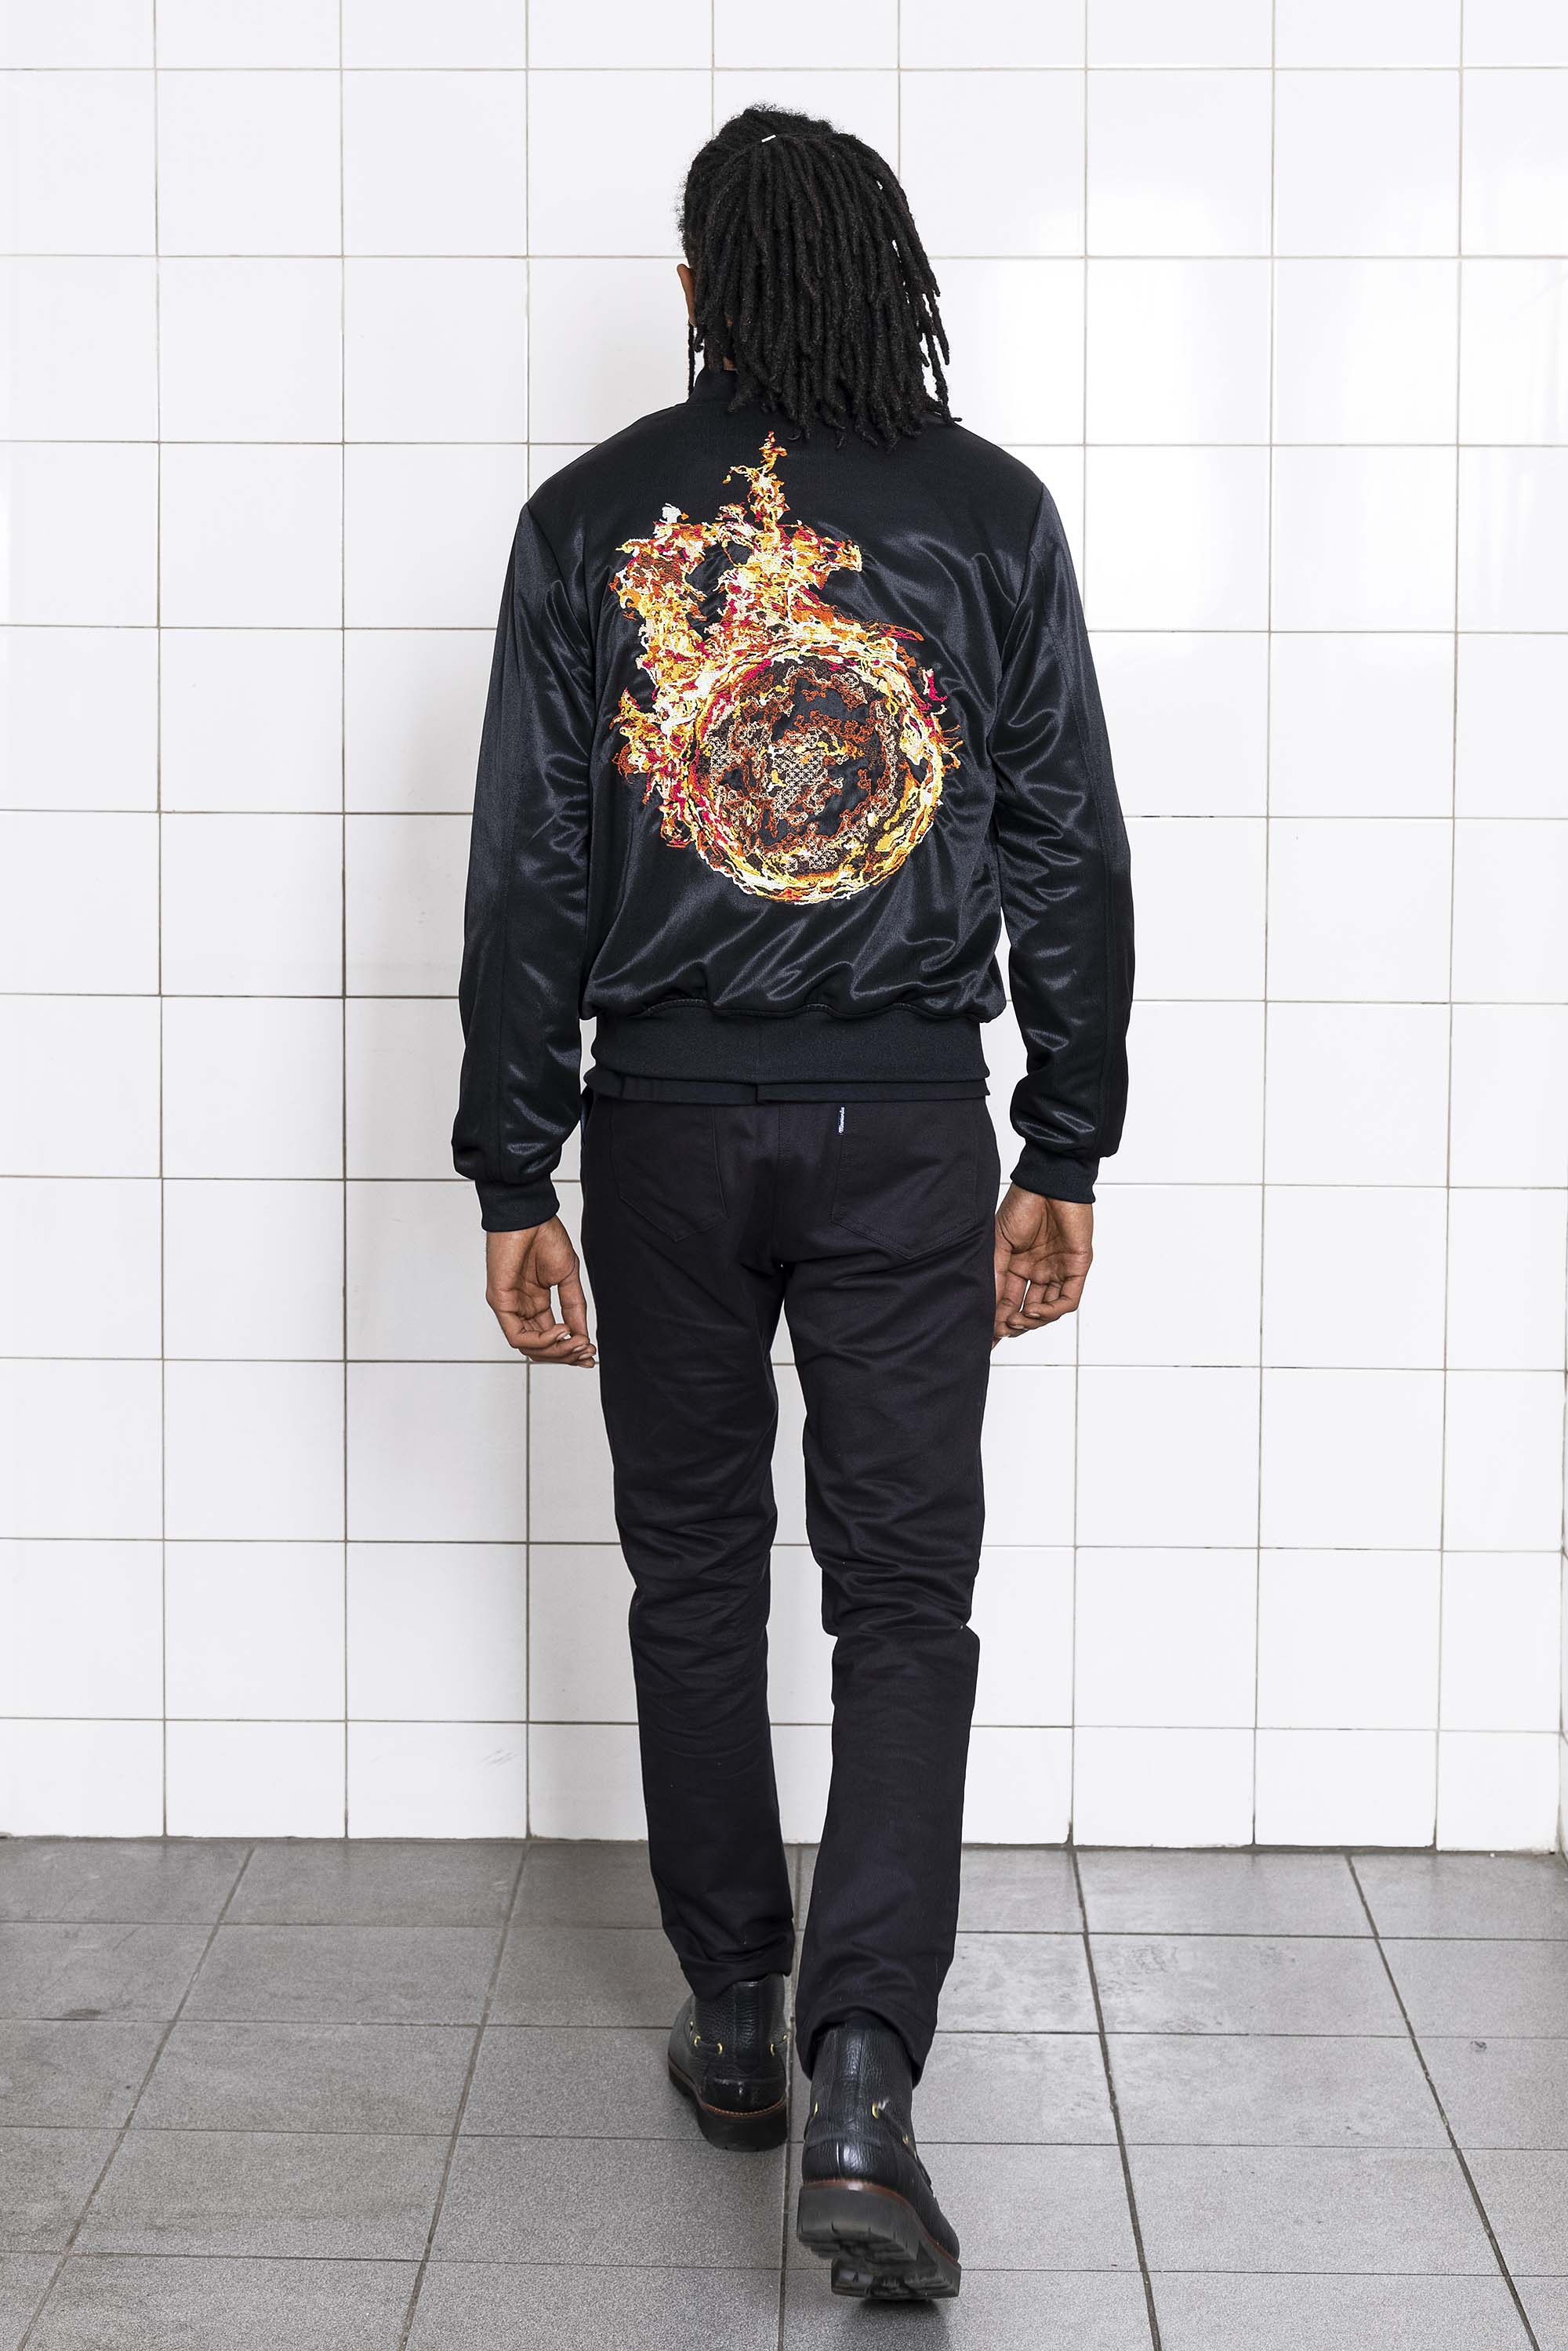 Souvenir polyester bomber jacket with fireball embroidery on the back and two front pockets